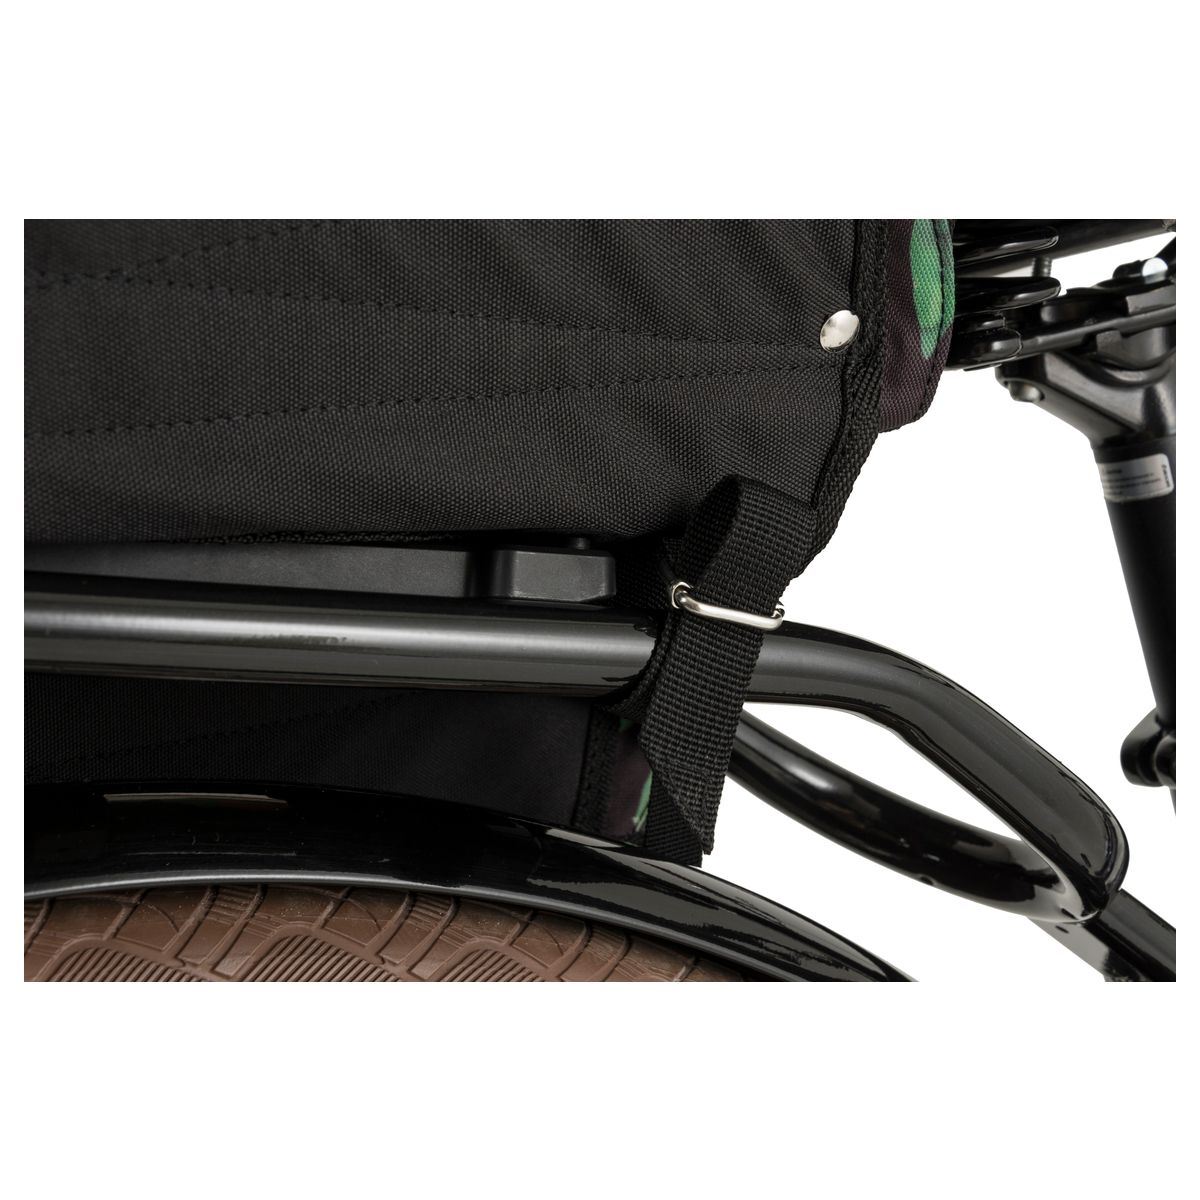 Fastrider Nara Double Bike Bag Trend fit example